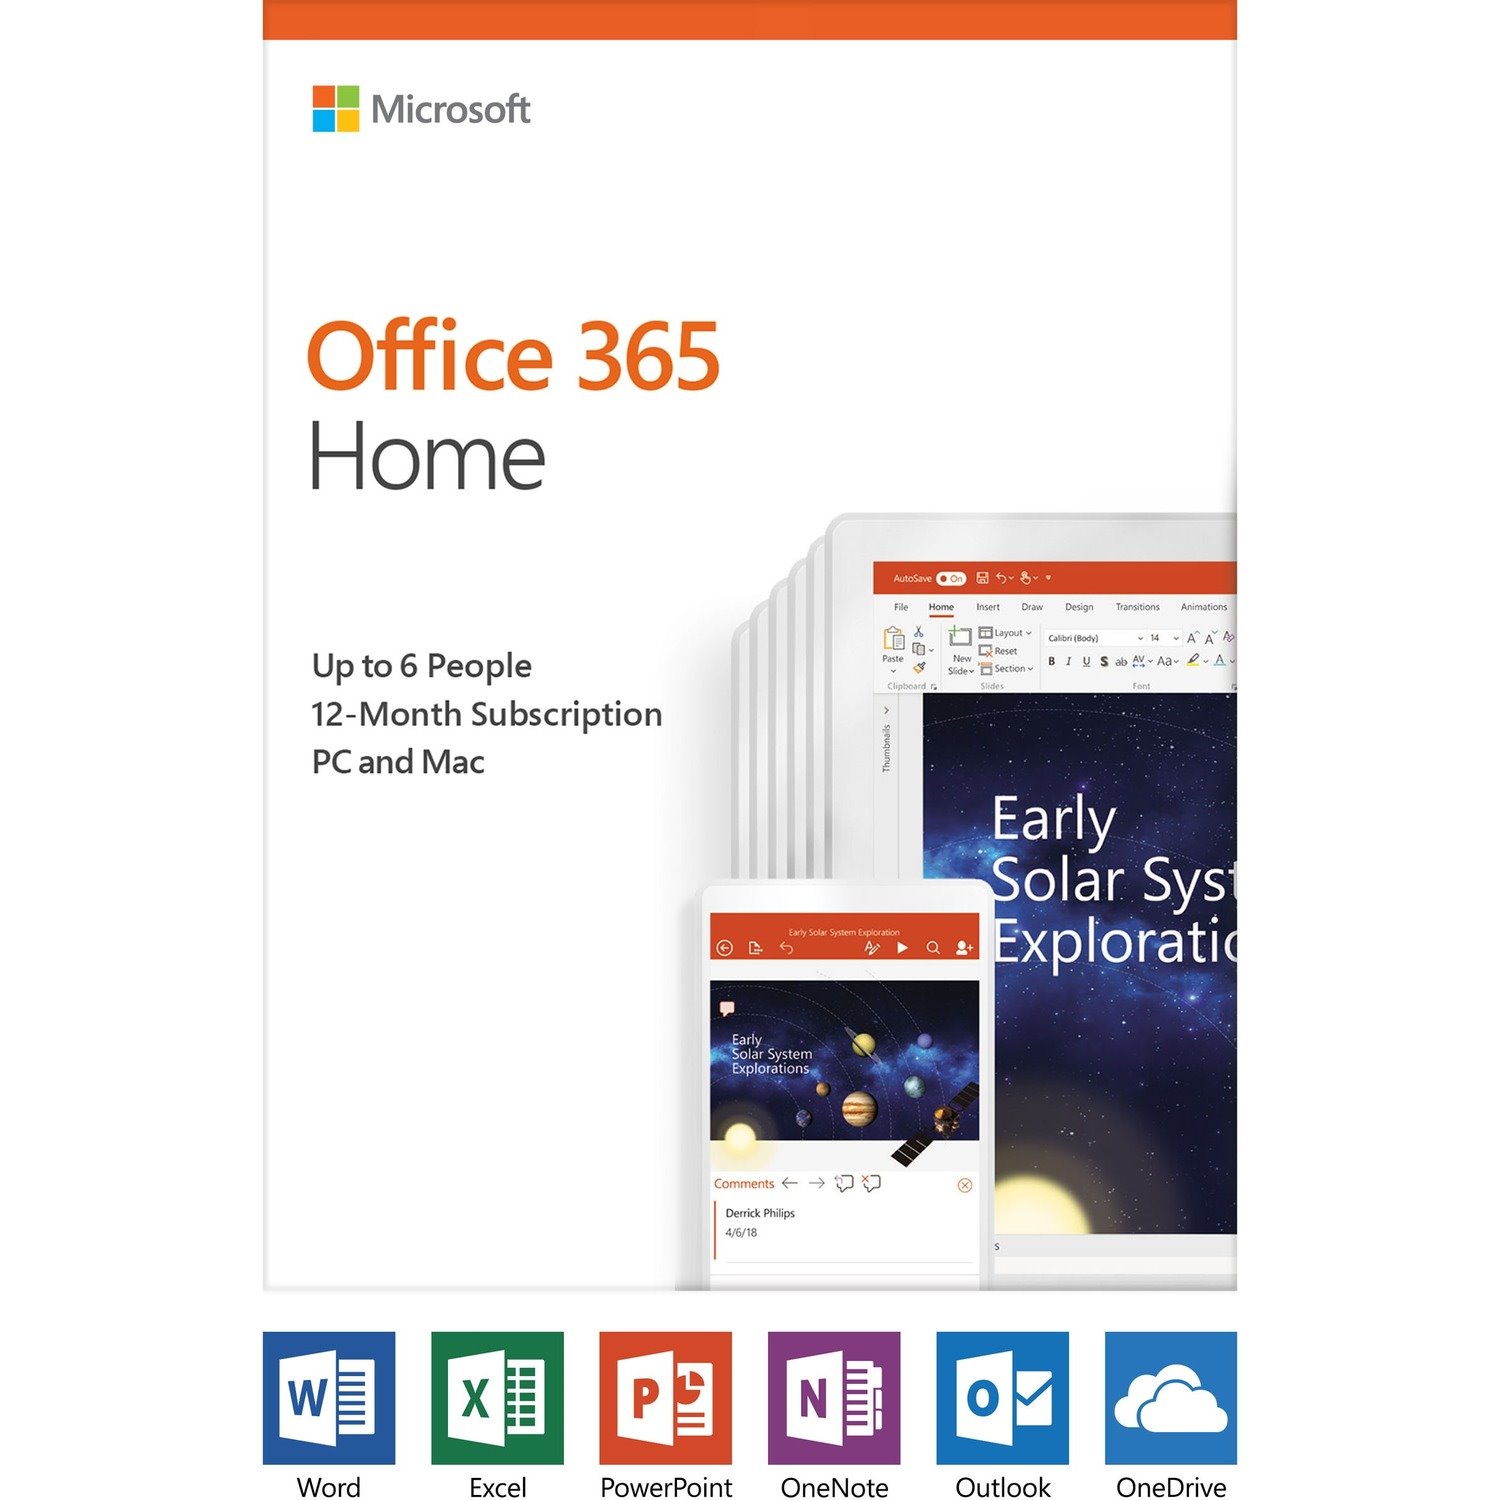 Microsoft Office 365 Home 32/64-bit - Subscription License - Up to 6 User, Up to 6 PC/Mac - 1 Year